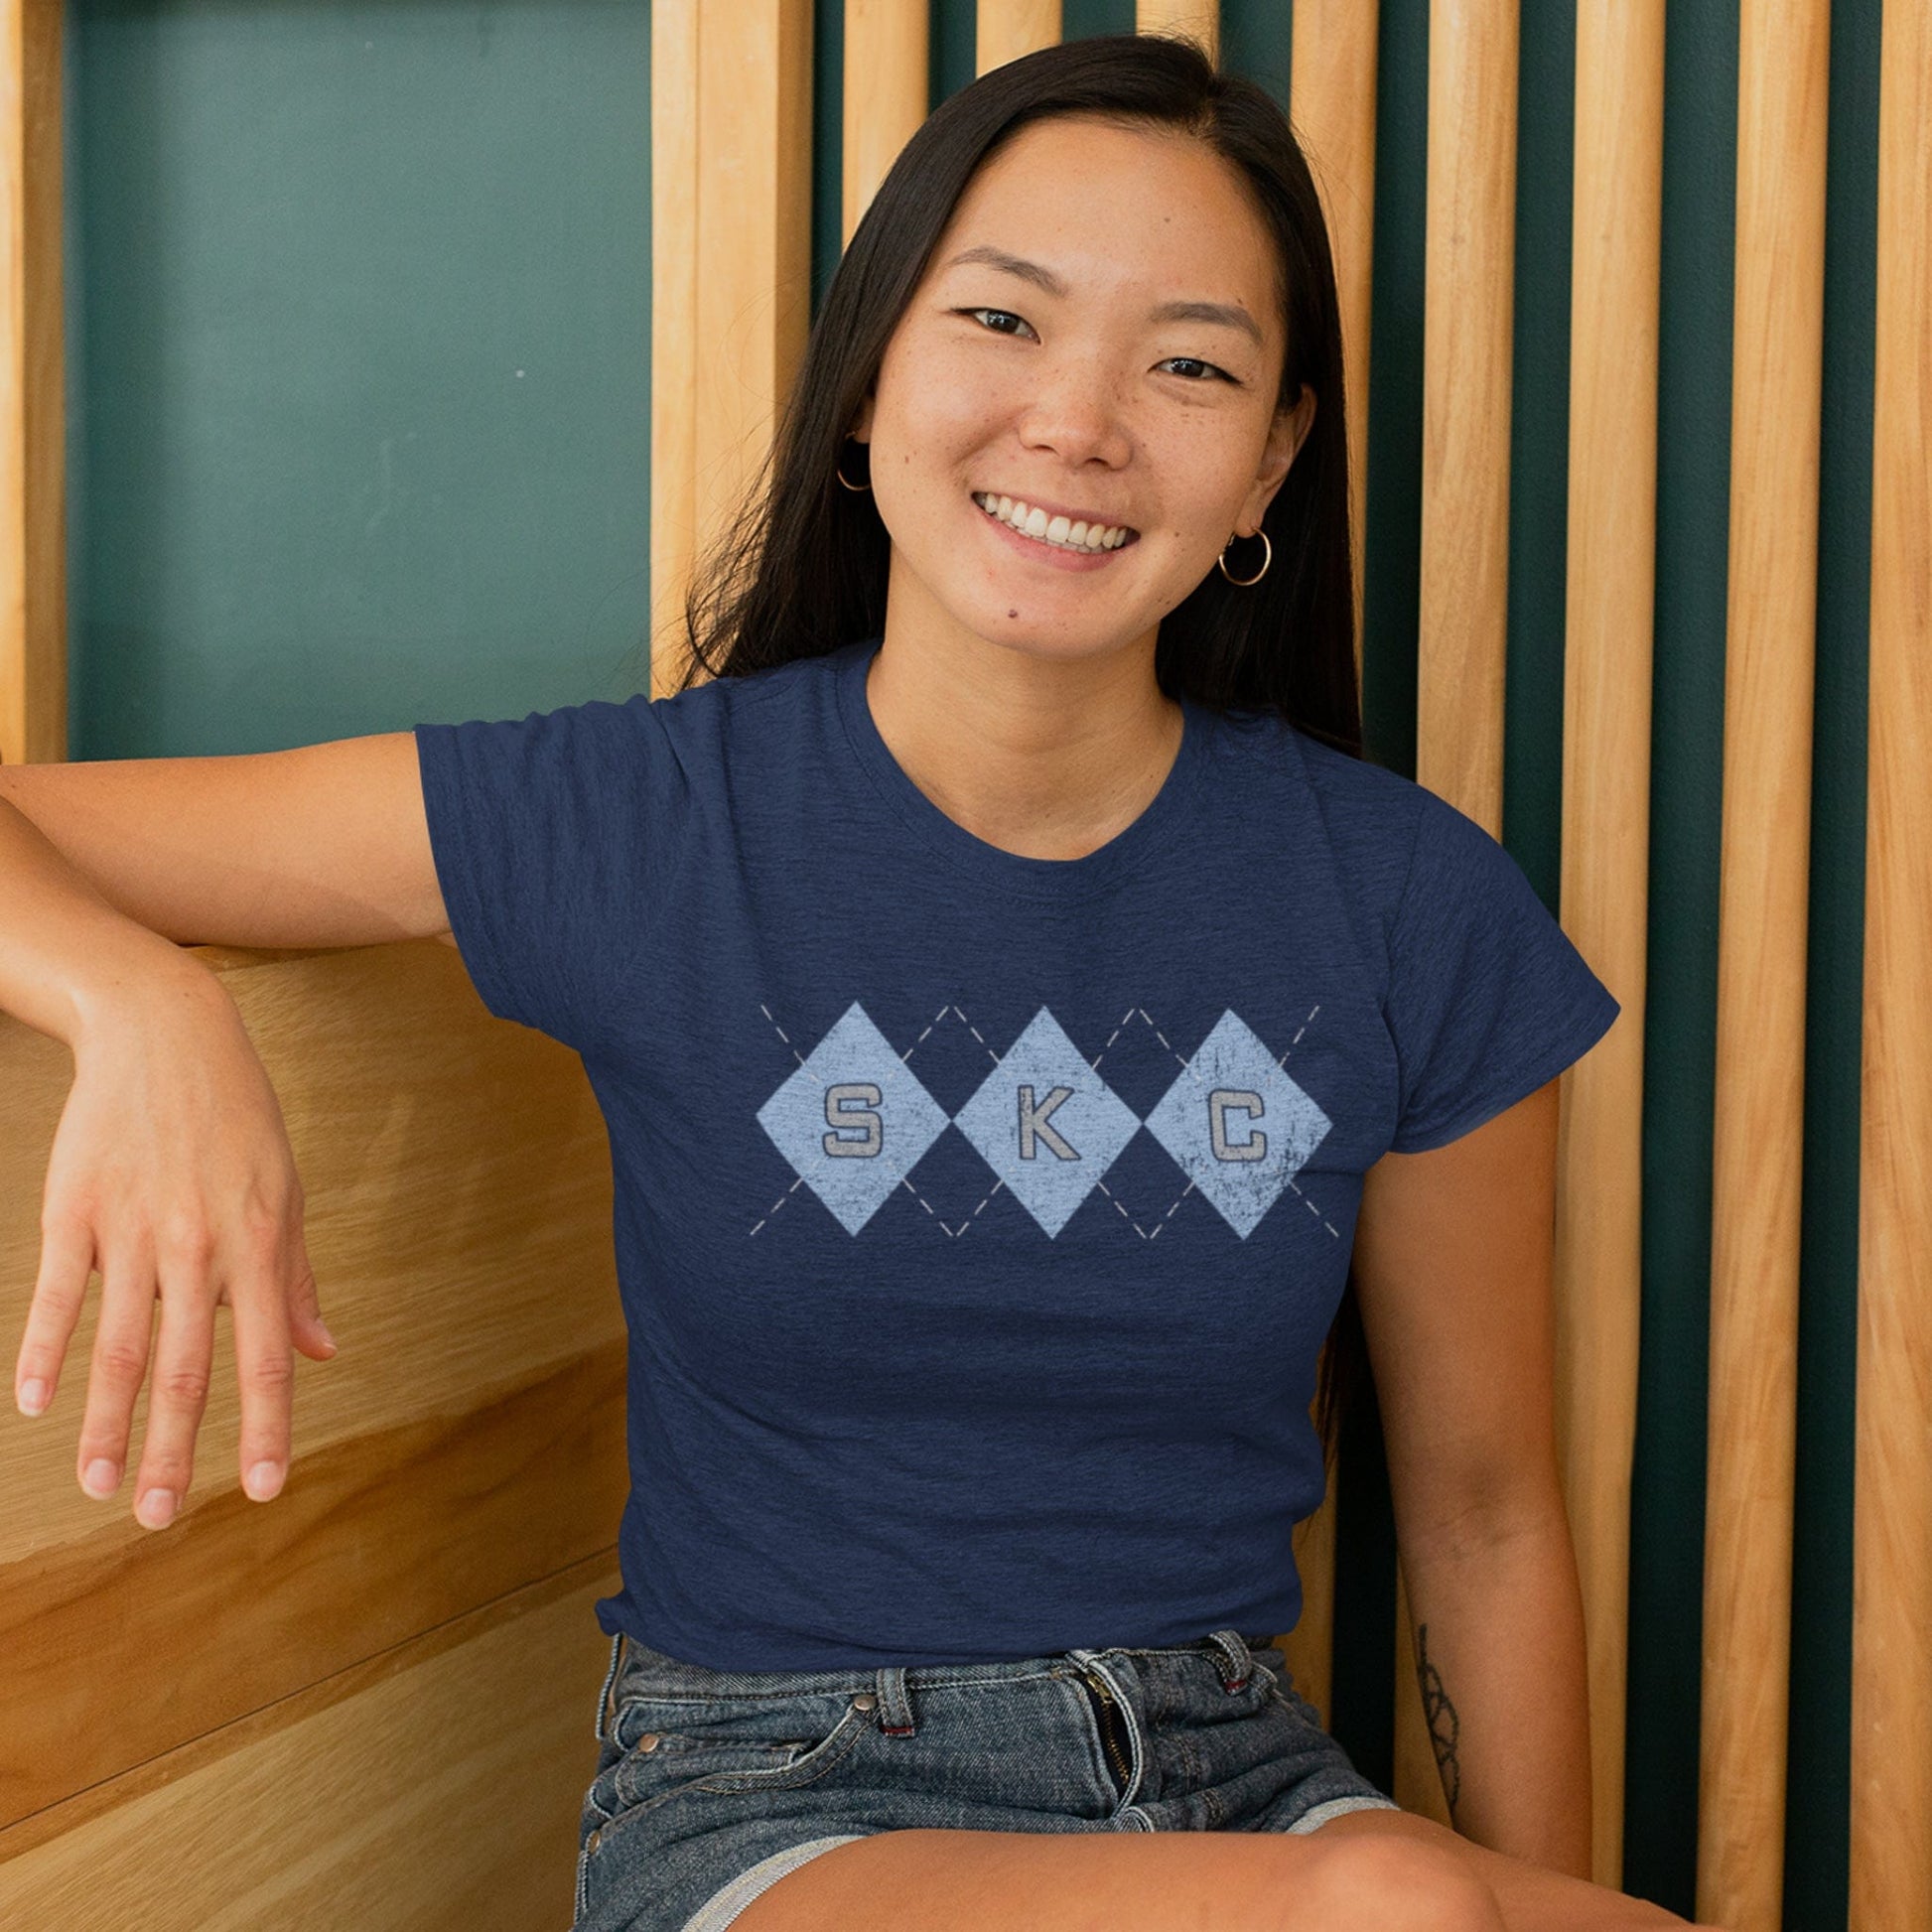 KC Swag Sporting Kansas City powder blue/grey SKC DIAMONDS with argyle stitching on heather navy t-shirt worn by female model sitting on wood bench in front of wood slats